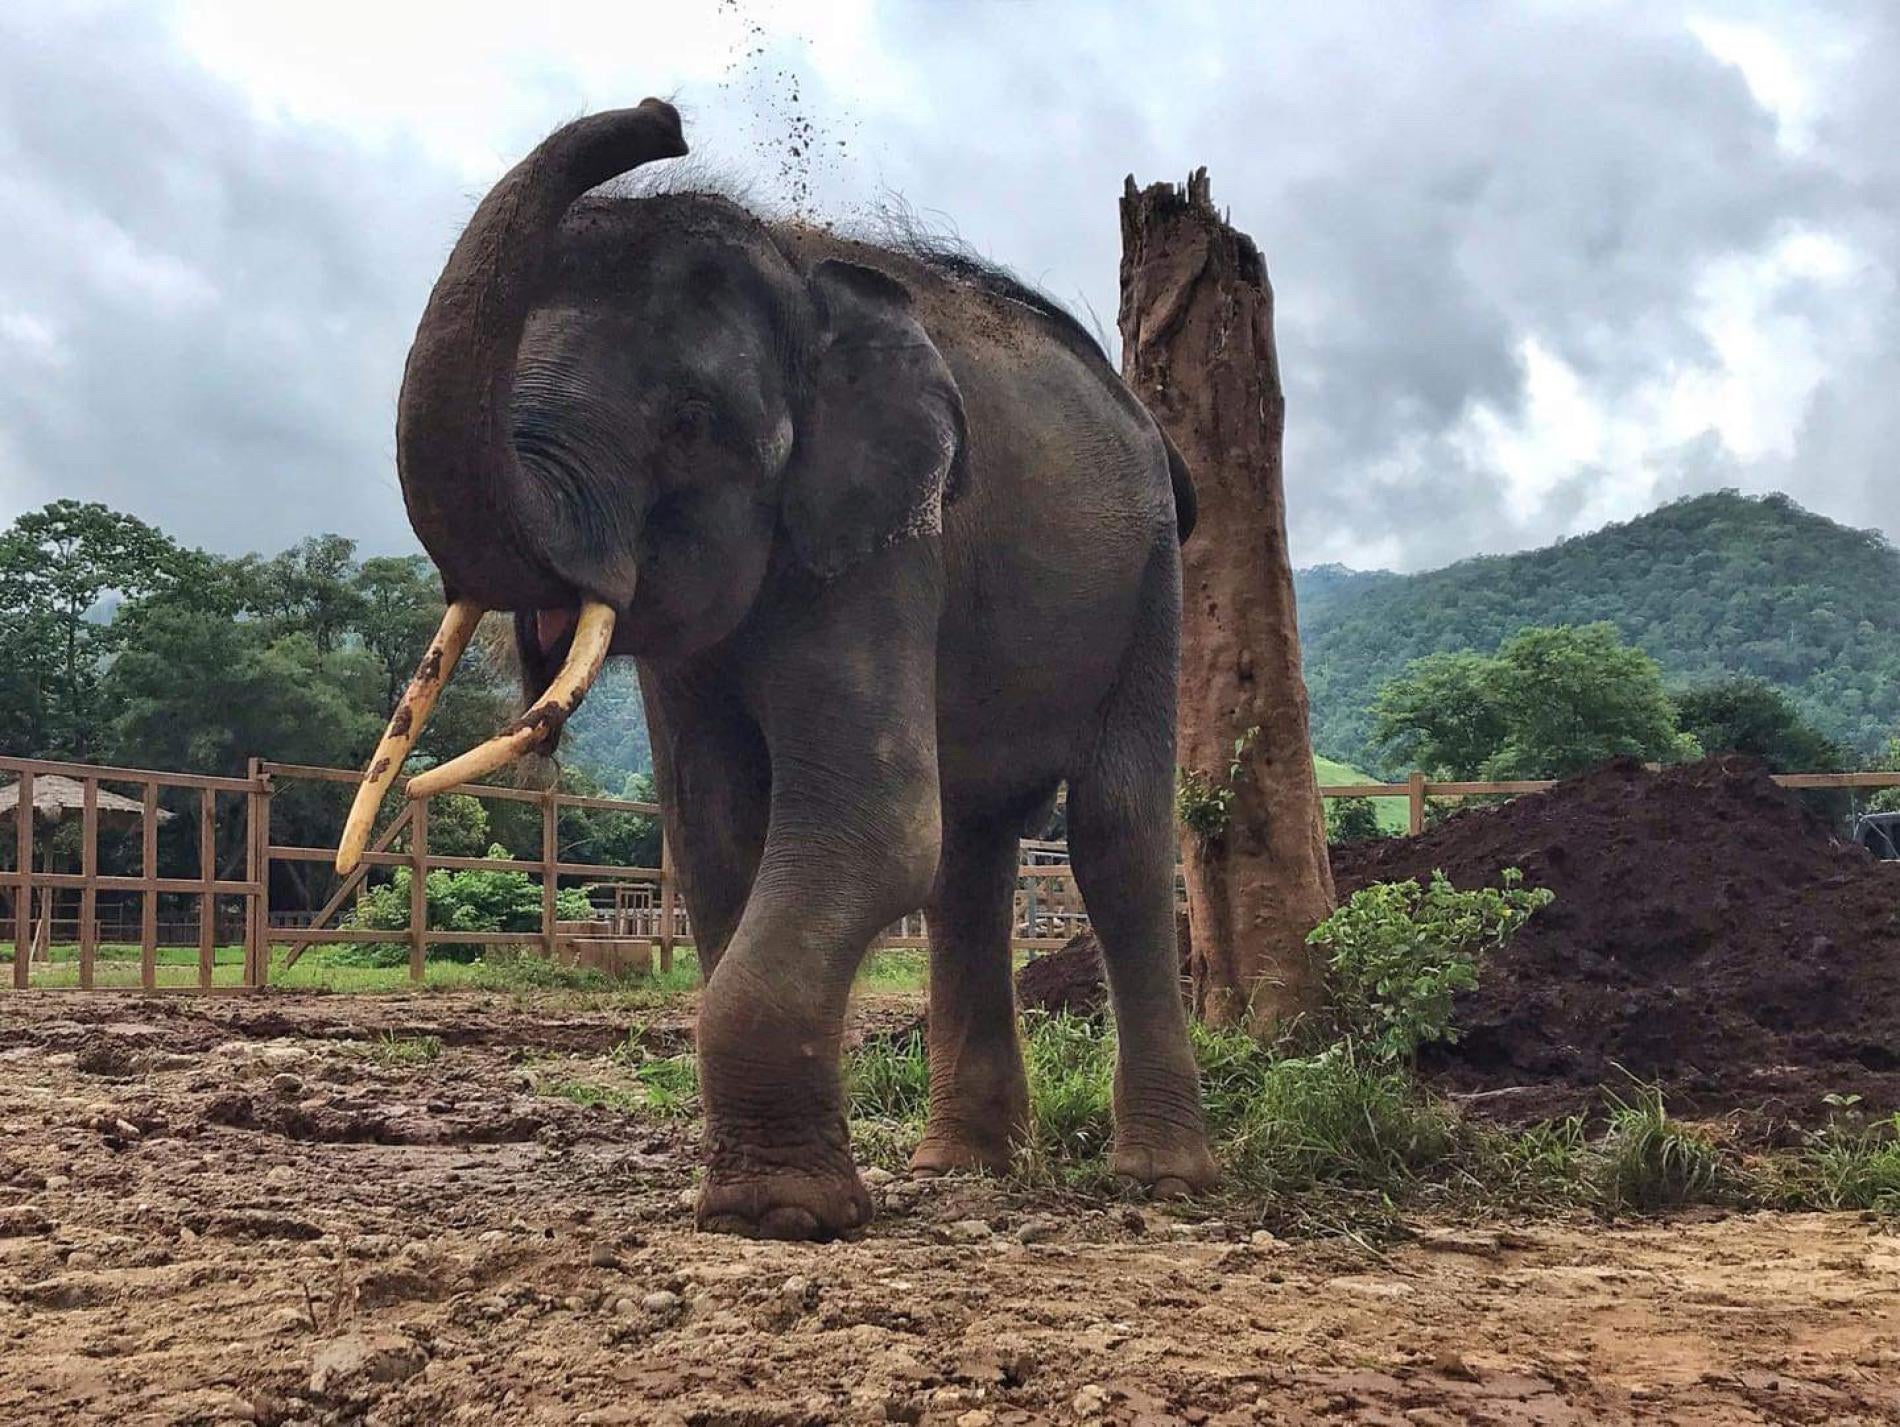 Chained & Injured Elephant Finally Gets Happy Ending When He Is Rescued From Cramped Enclosure - WORLD OF BUZZ